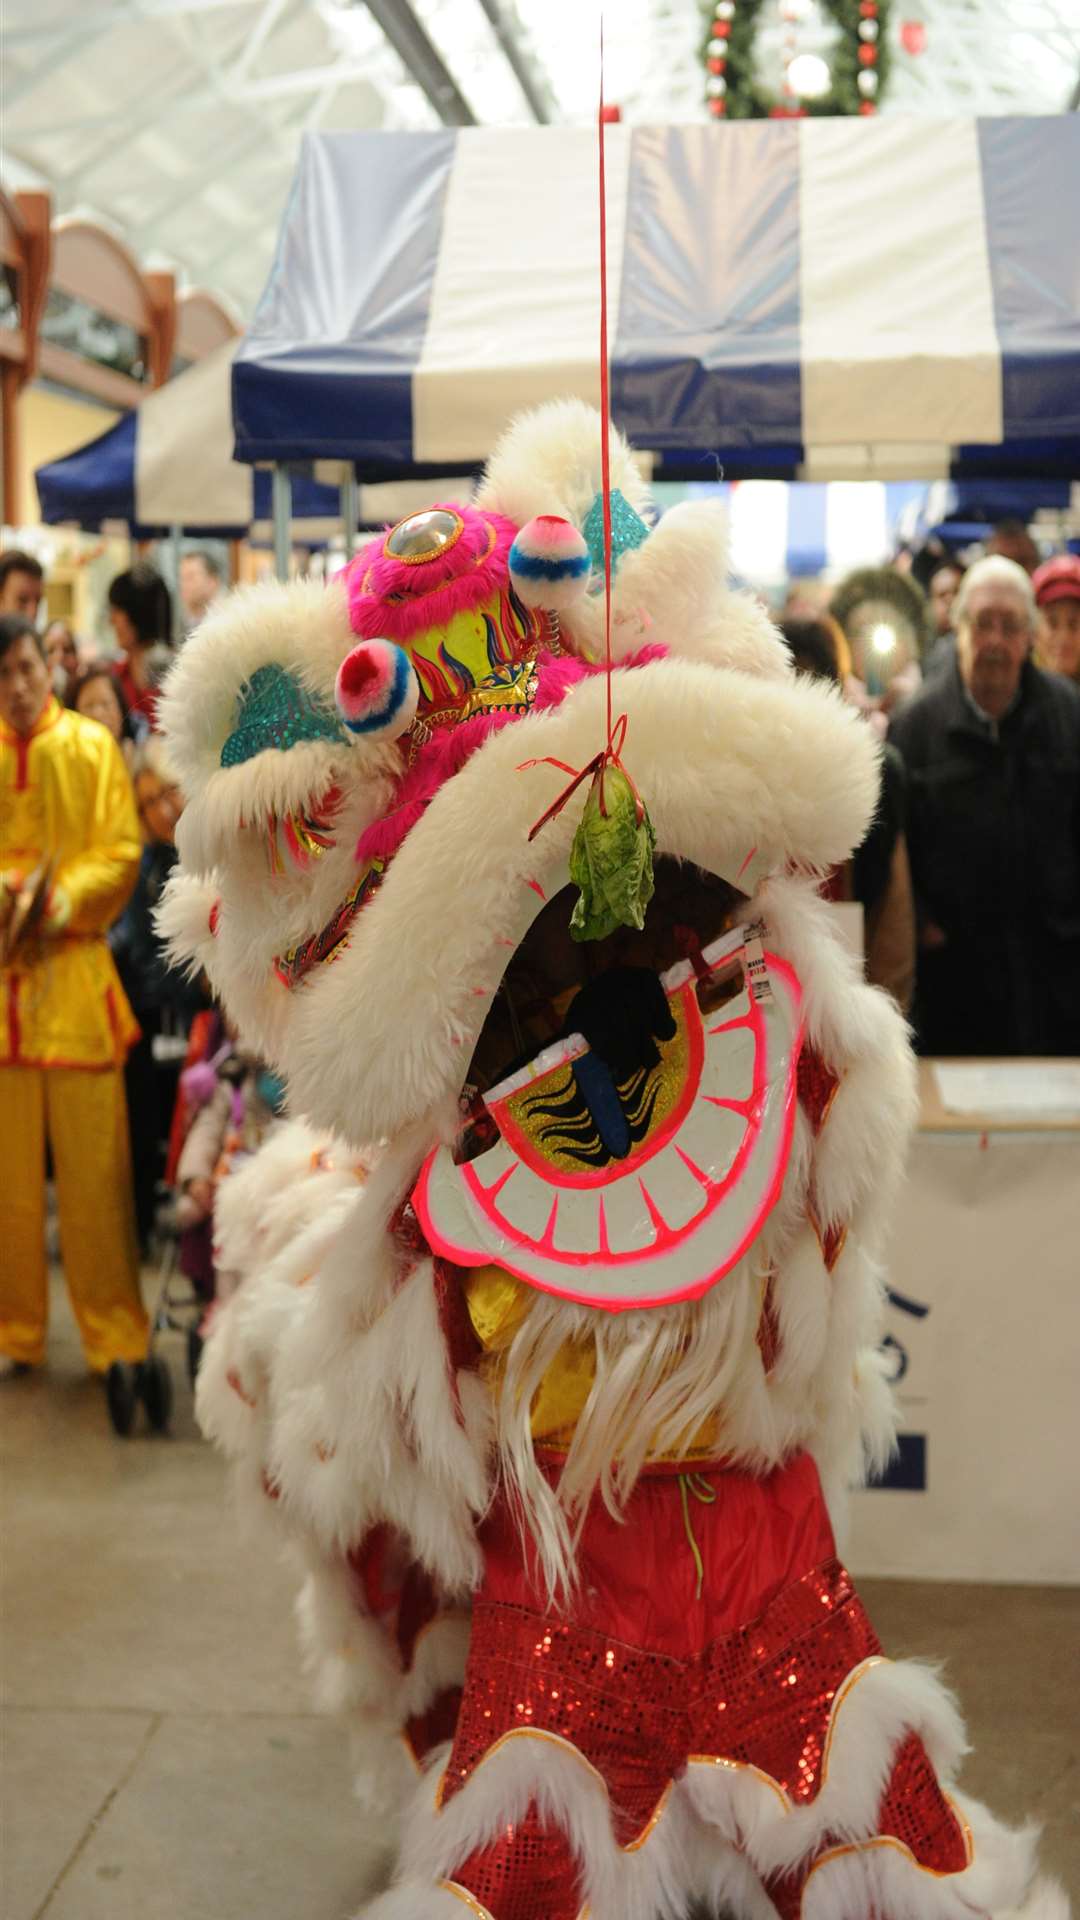 A Chinese lion dance is performed in Gravesend Borough Market to mark the start of the Year of the Rooster 2017